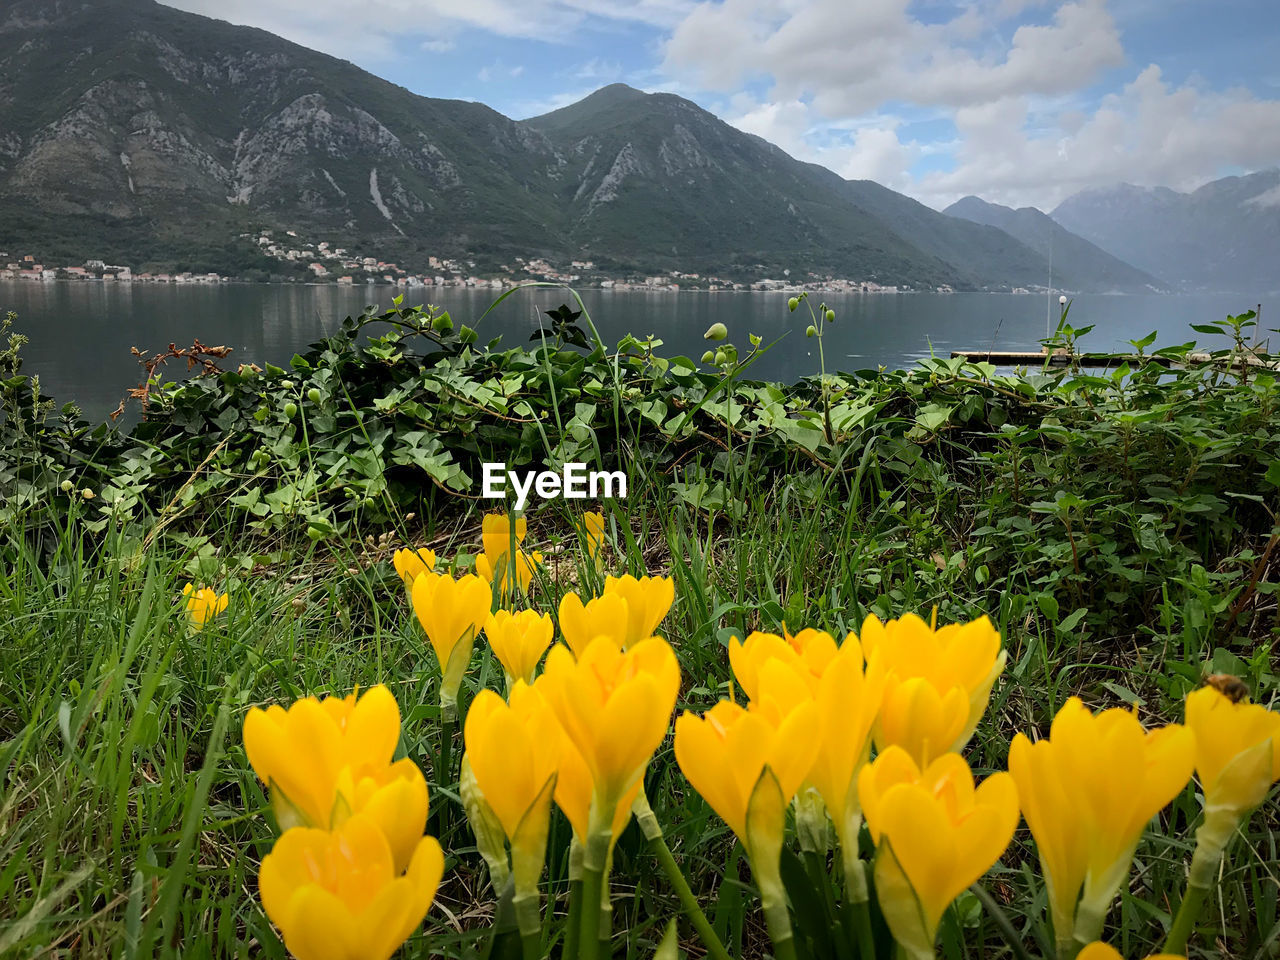 SCENIC VIEW OF YELLOW FLOWERING PLANTS AGAINST MOUNTAINS